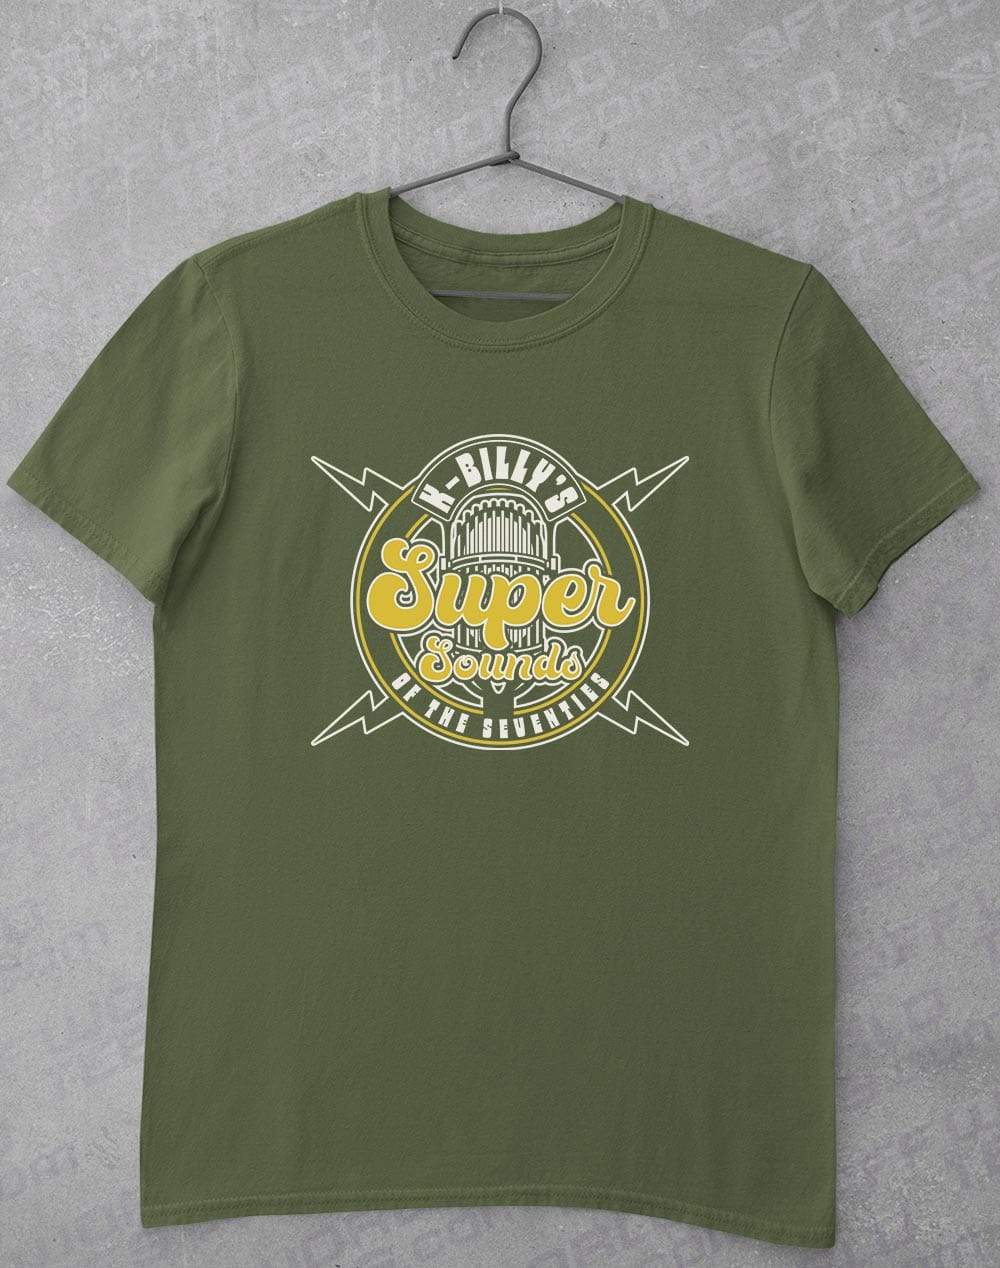 K-Billy's Super Sounds of the 70's T-Shirt L / Military Green  - Off World Tees